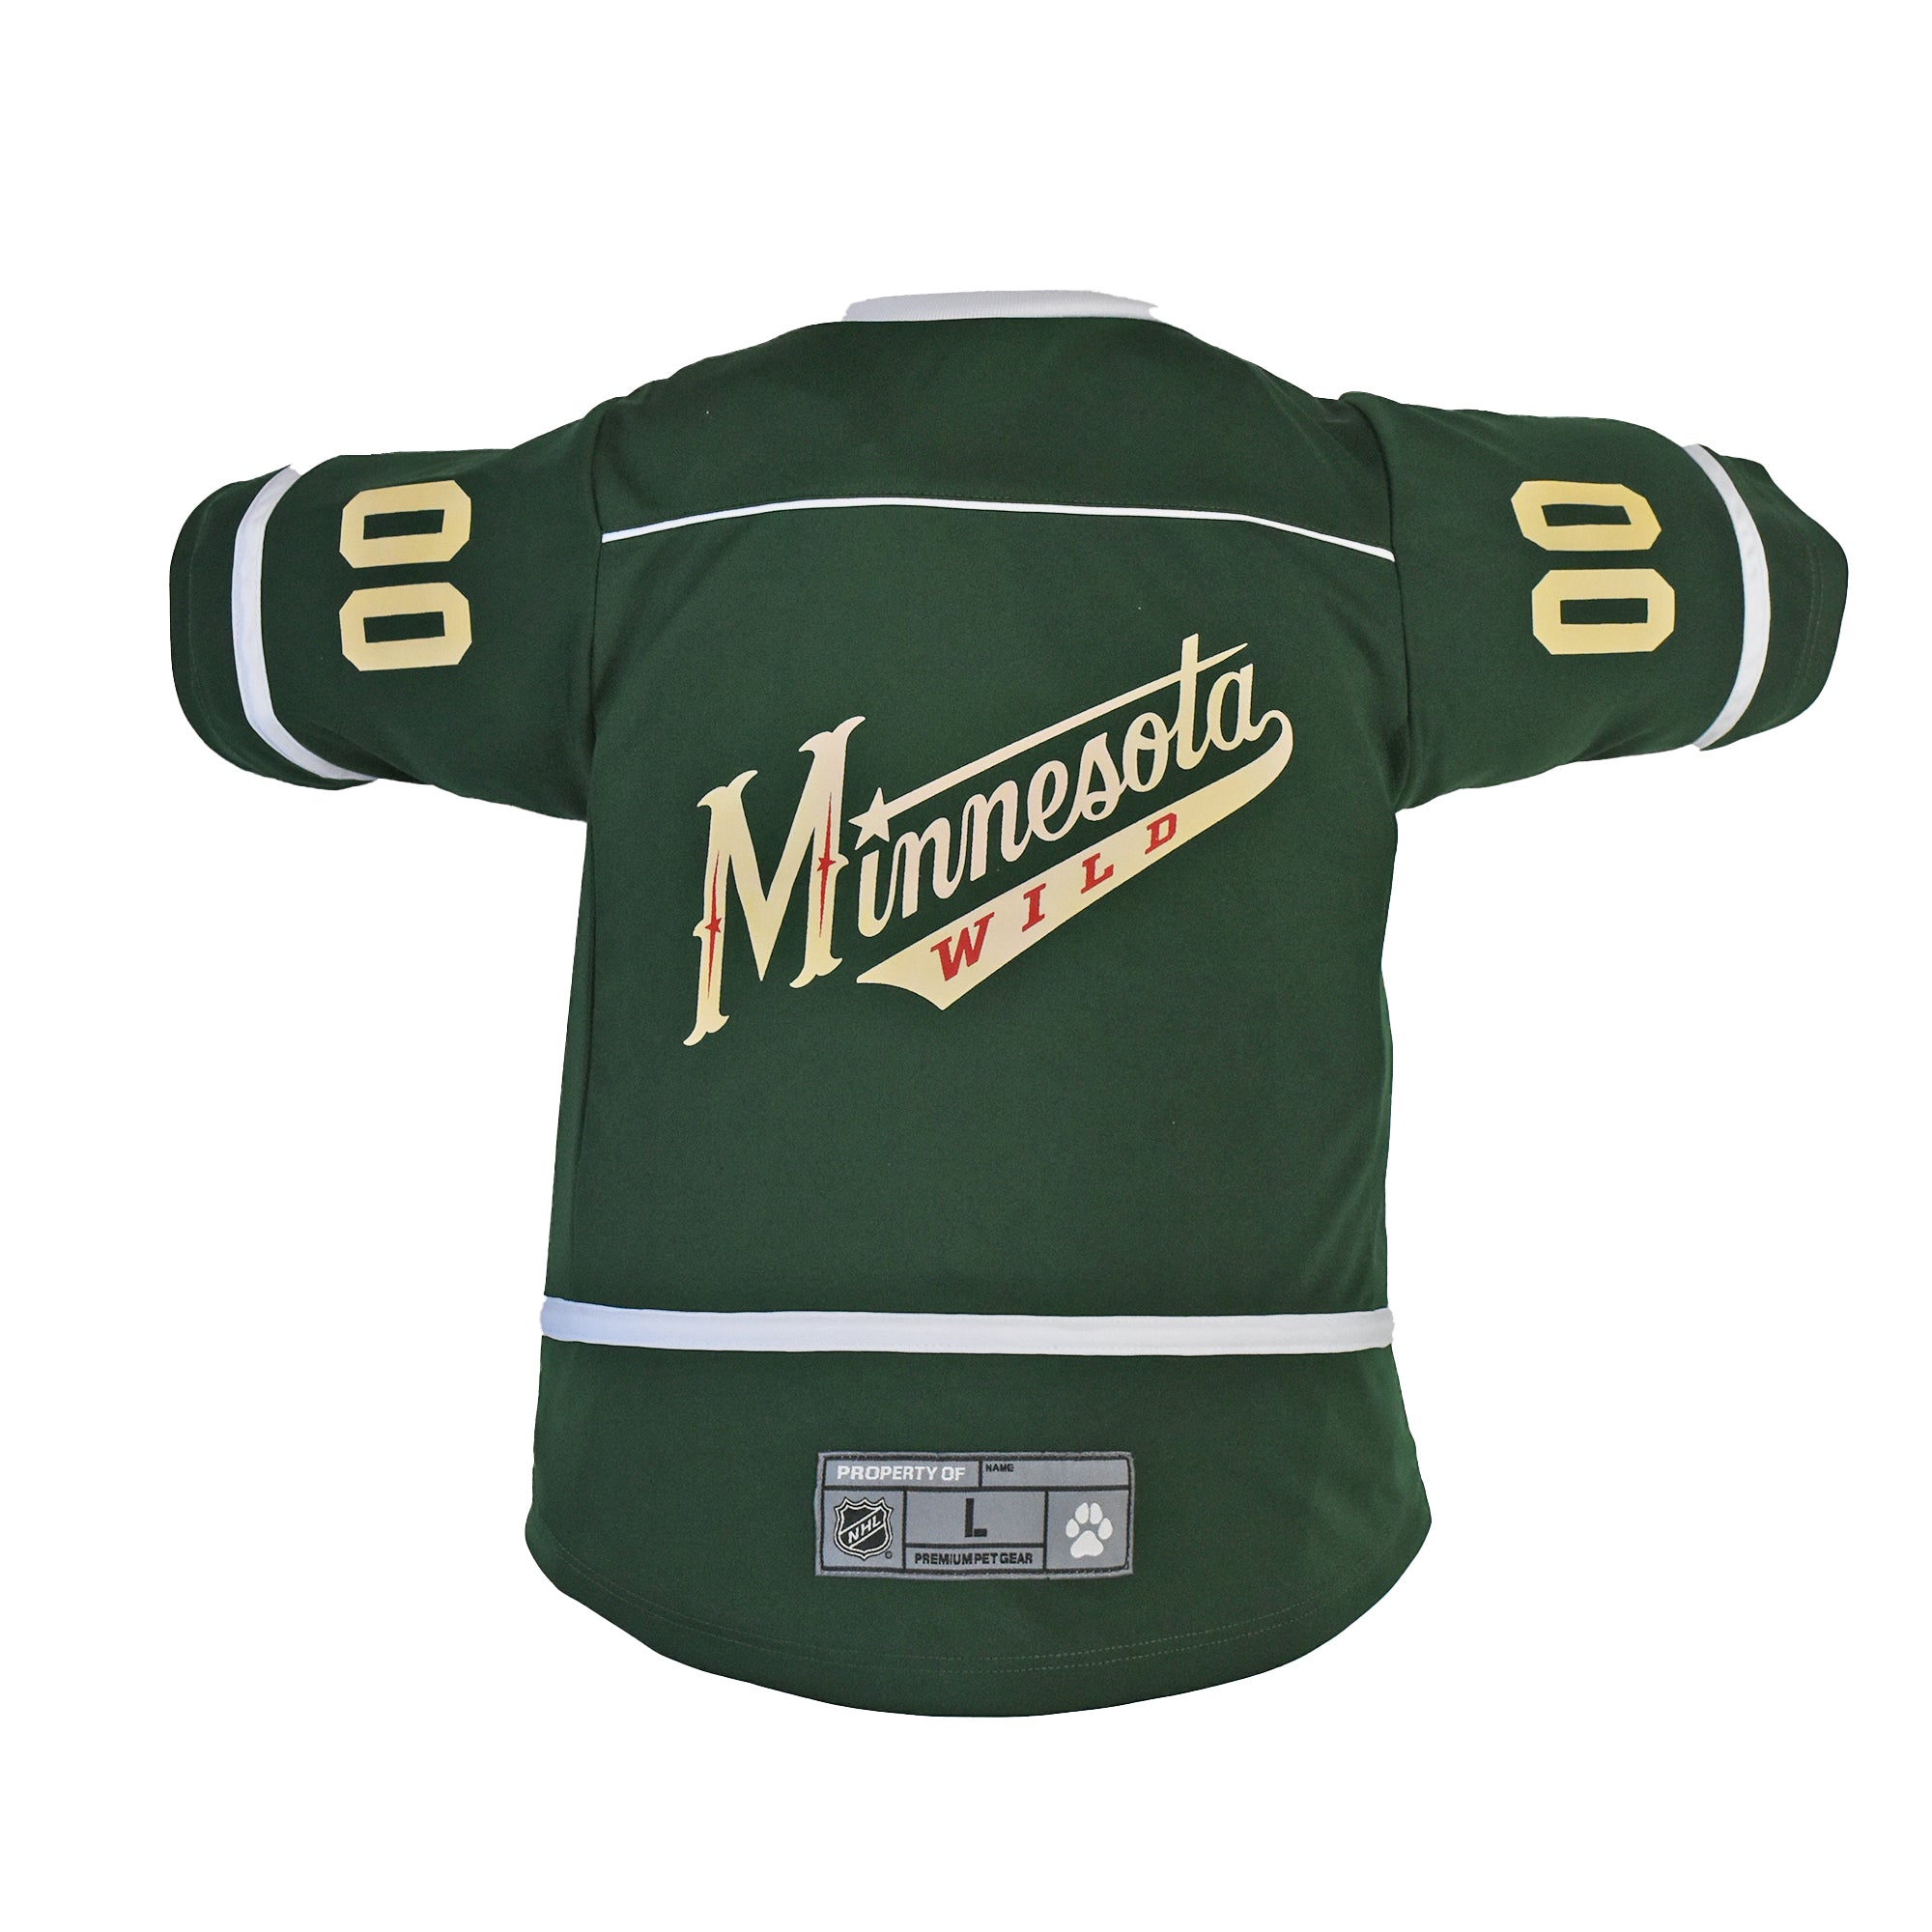 NHL Minnesota Wild Jersey for Dogs & Cats, Small. - Let Your Pet Be A Real  NHL Fan! Small Hockey Jersey Minnesota Wild